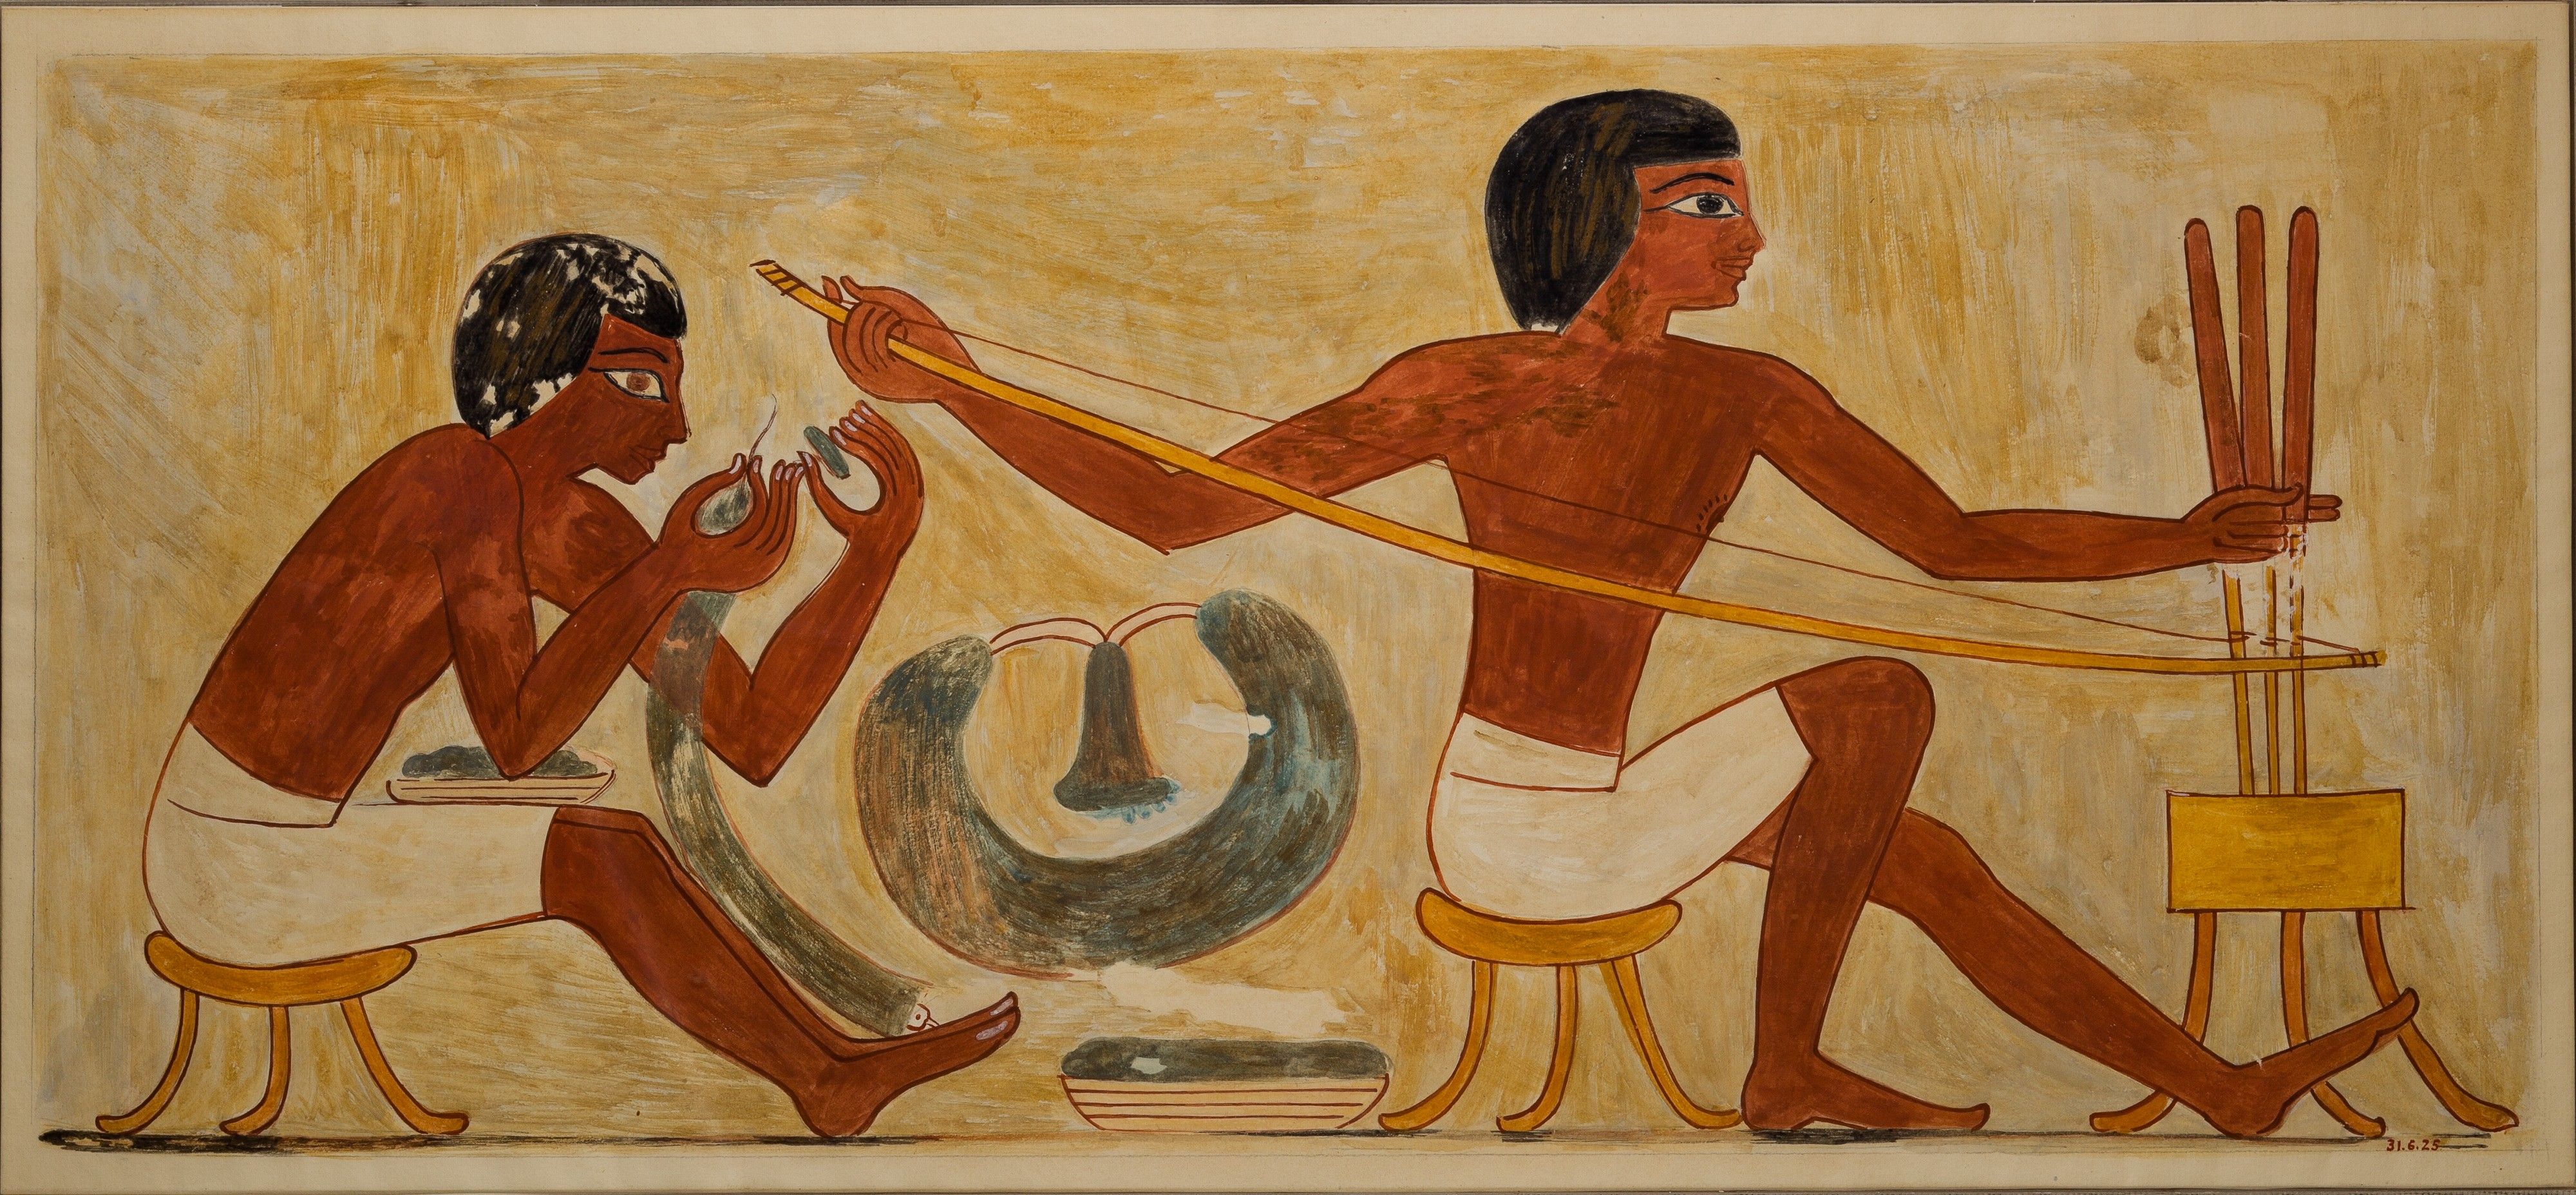 Stringing and Drilling Beads, Tomb of Rekhmire ca. 1504–1425 B.C.